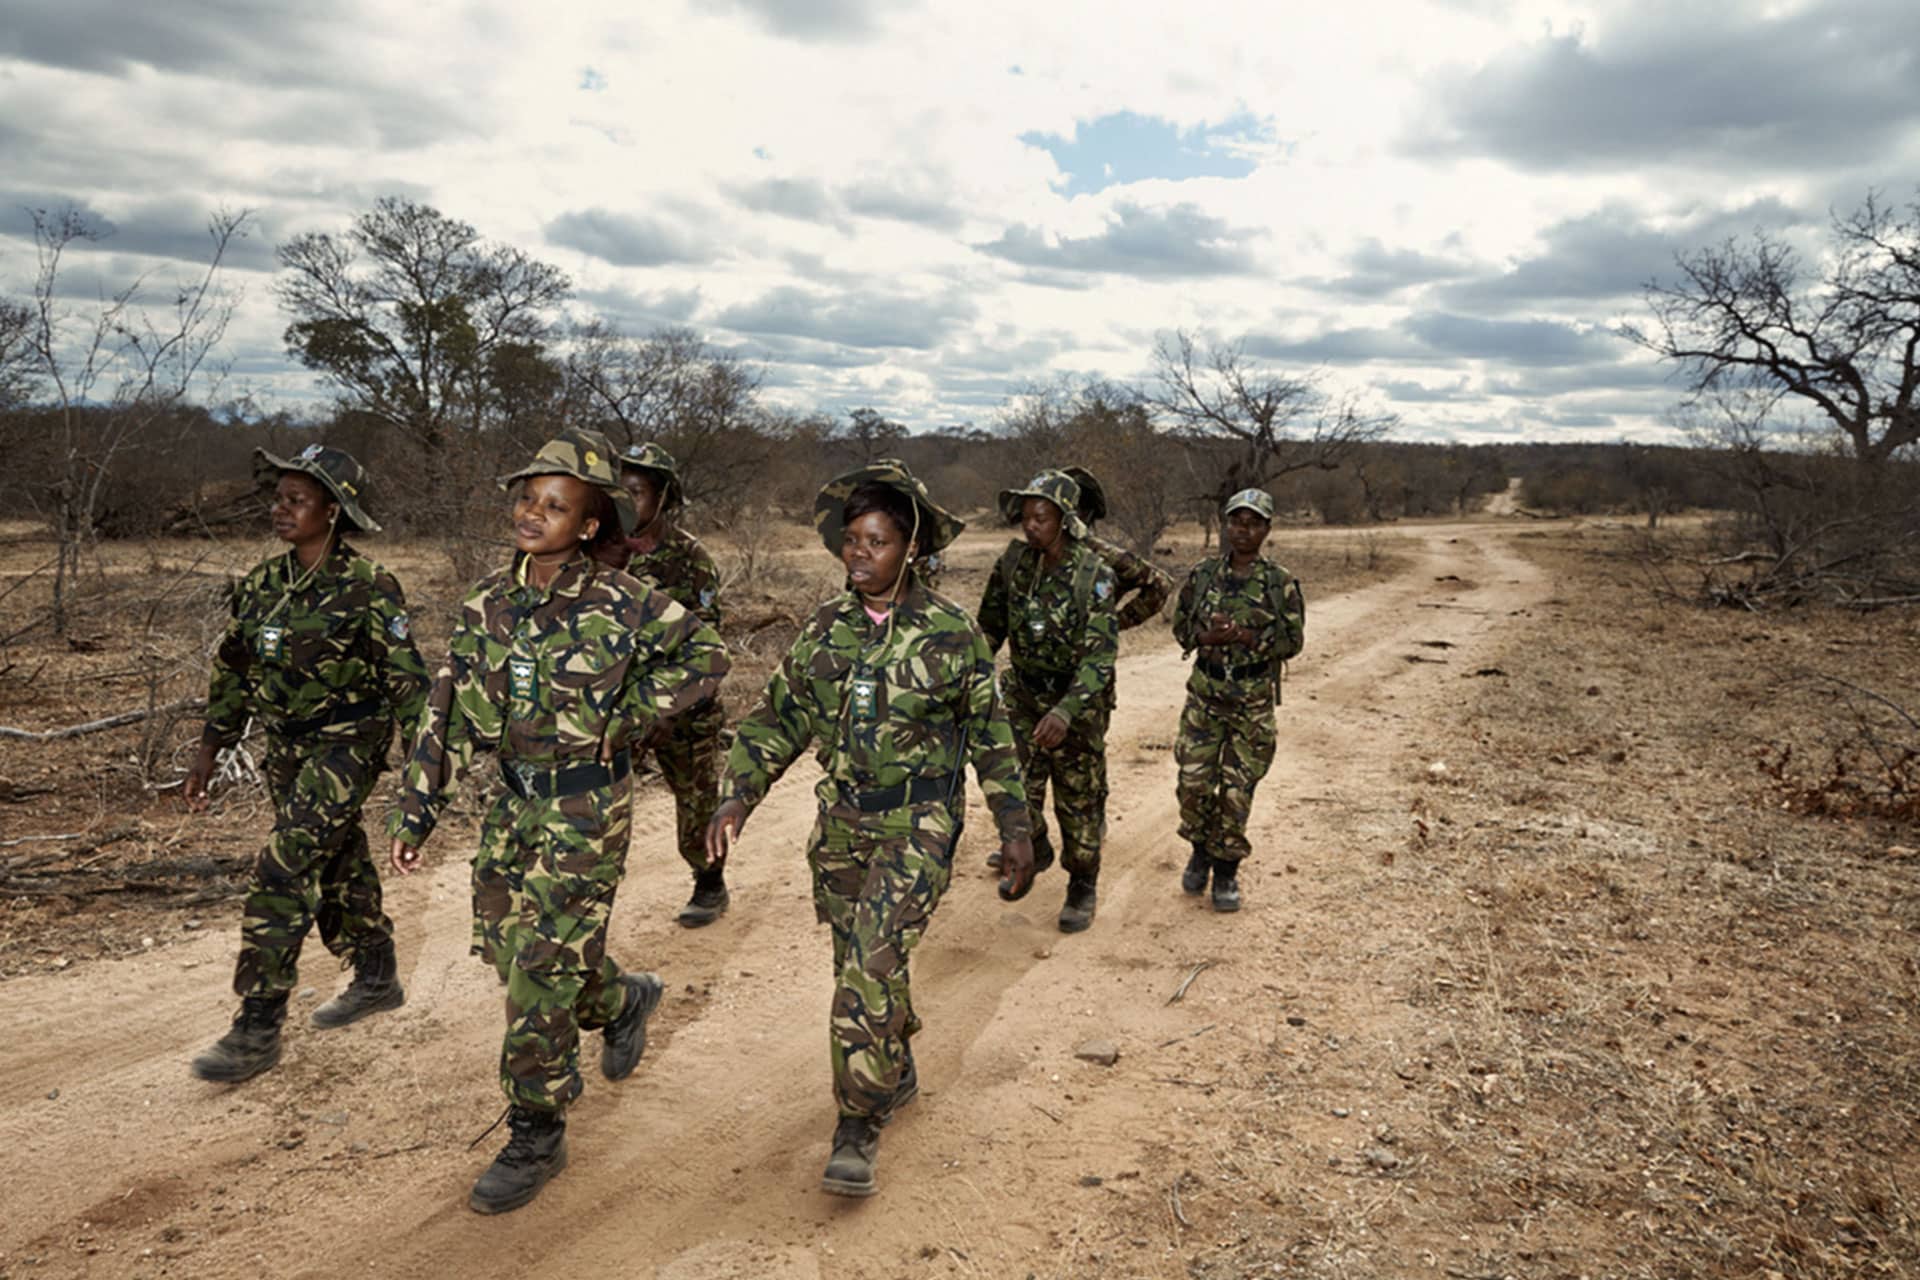 Women walking in military uniform in the bush. Conservation in South Africa